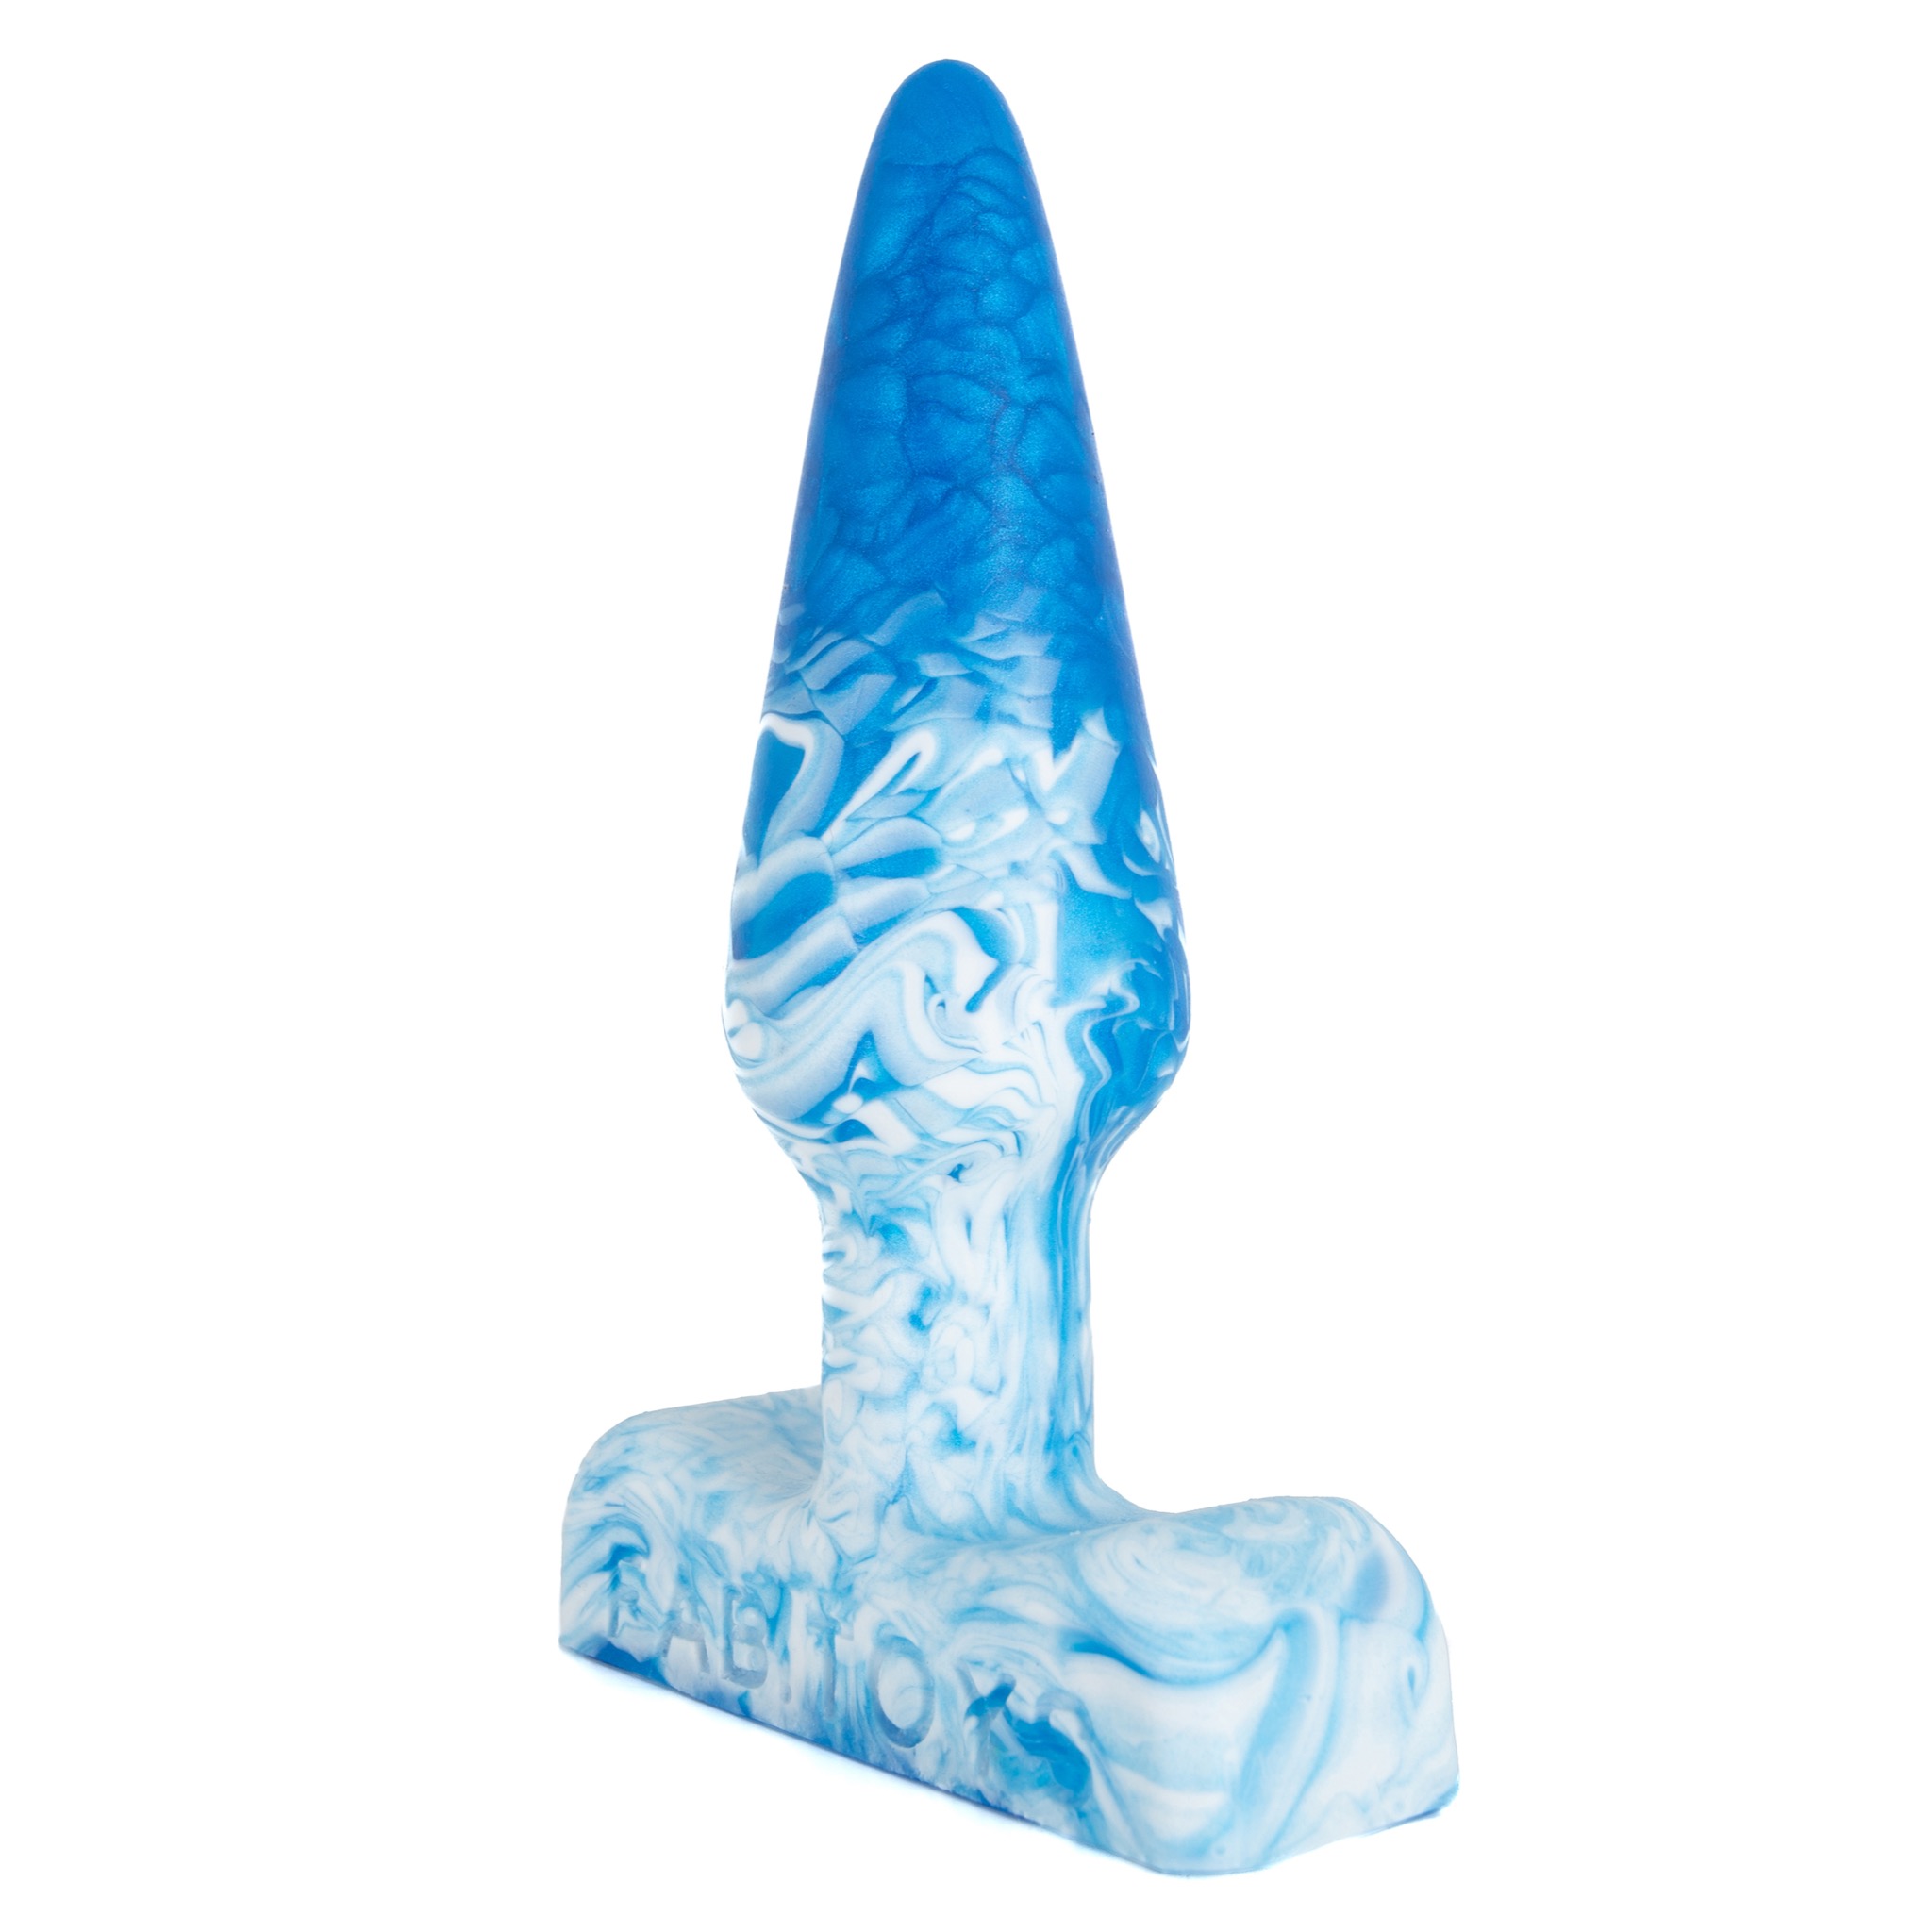 Classic Butt Plug - Large - Blue and White